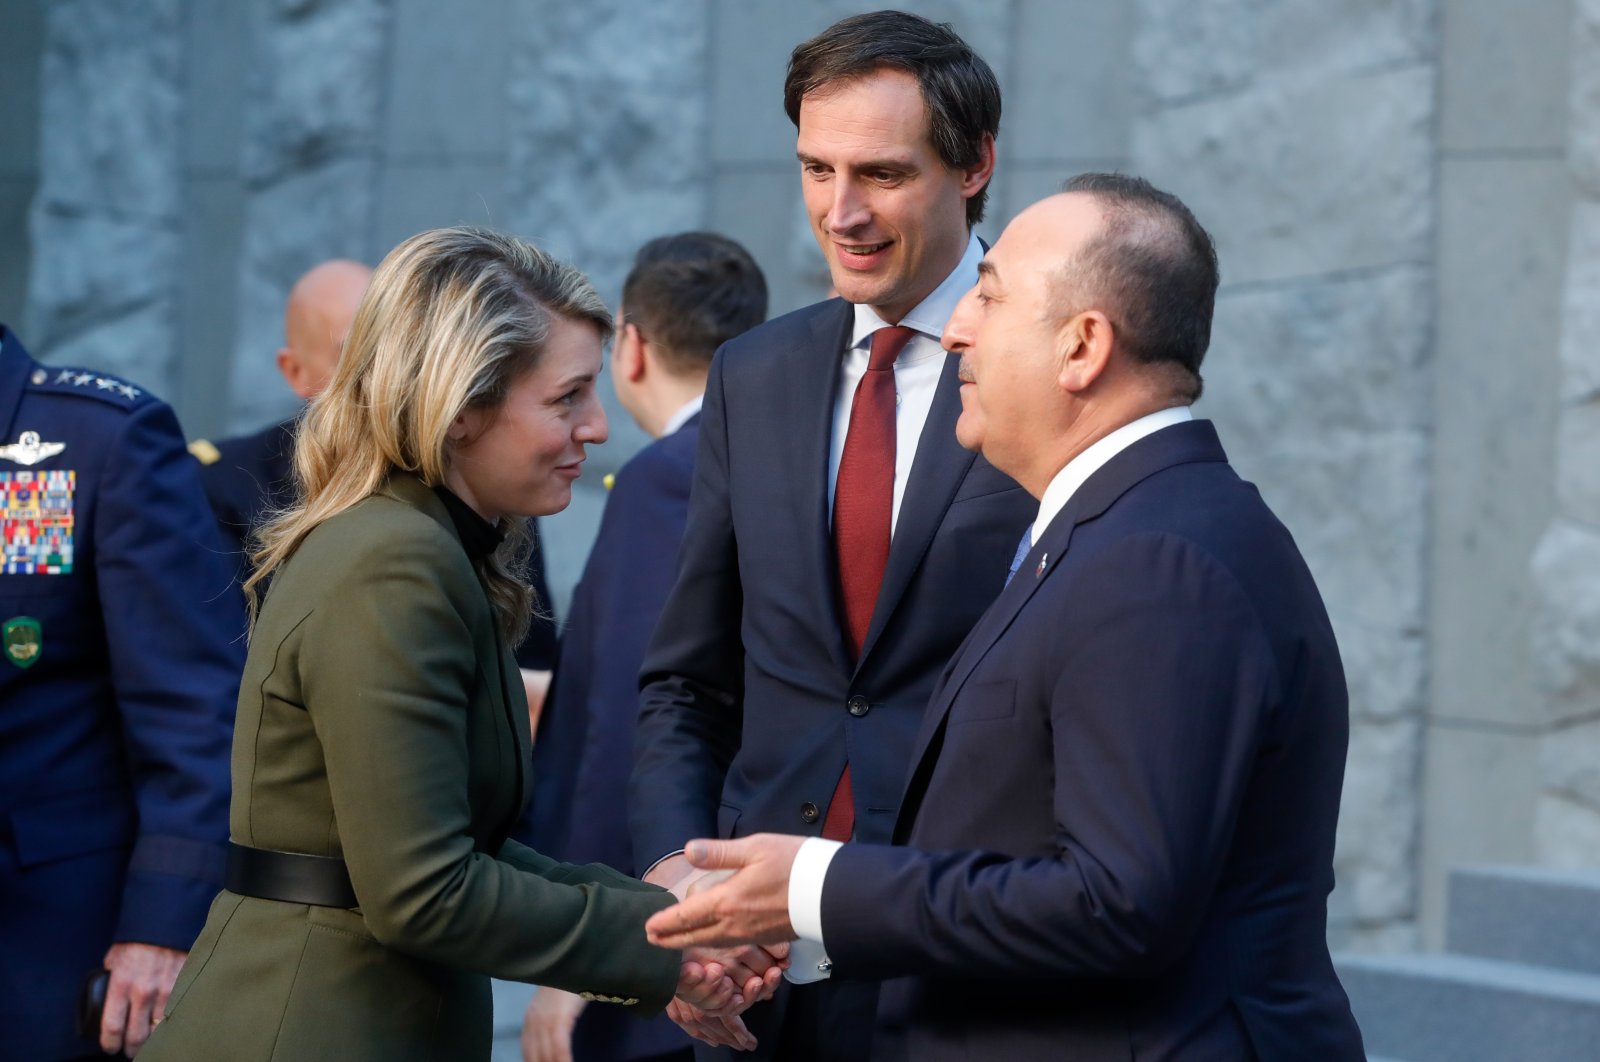 Canadian Foreign Minister Melanie Joly (L), Dutch Minister of Foreign Affairs Wopke Hoekstra (C) and Turkish Foreign Minister Mevlüt Çavuşoğlu (R) chat during a group photo session following a meeting of NATO foreign ministers at NATO headquarters in Brussels, Belgium, April 7, 2022. (EPA Photo)